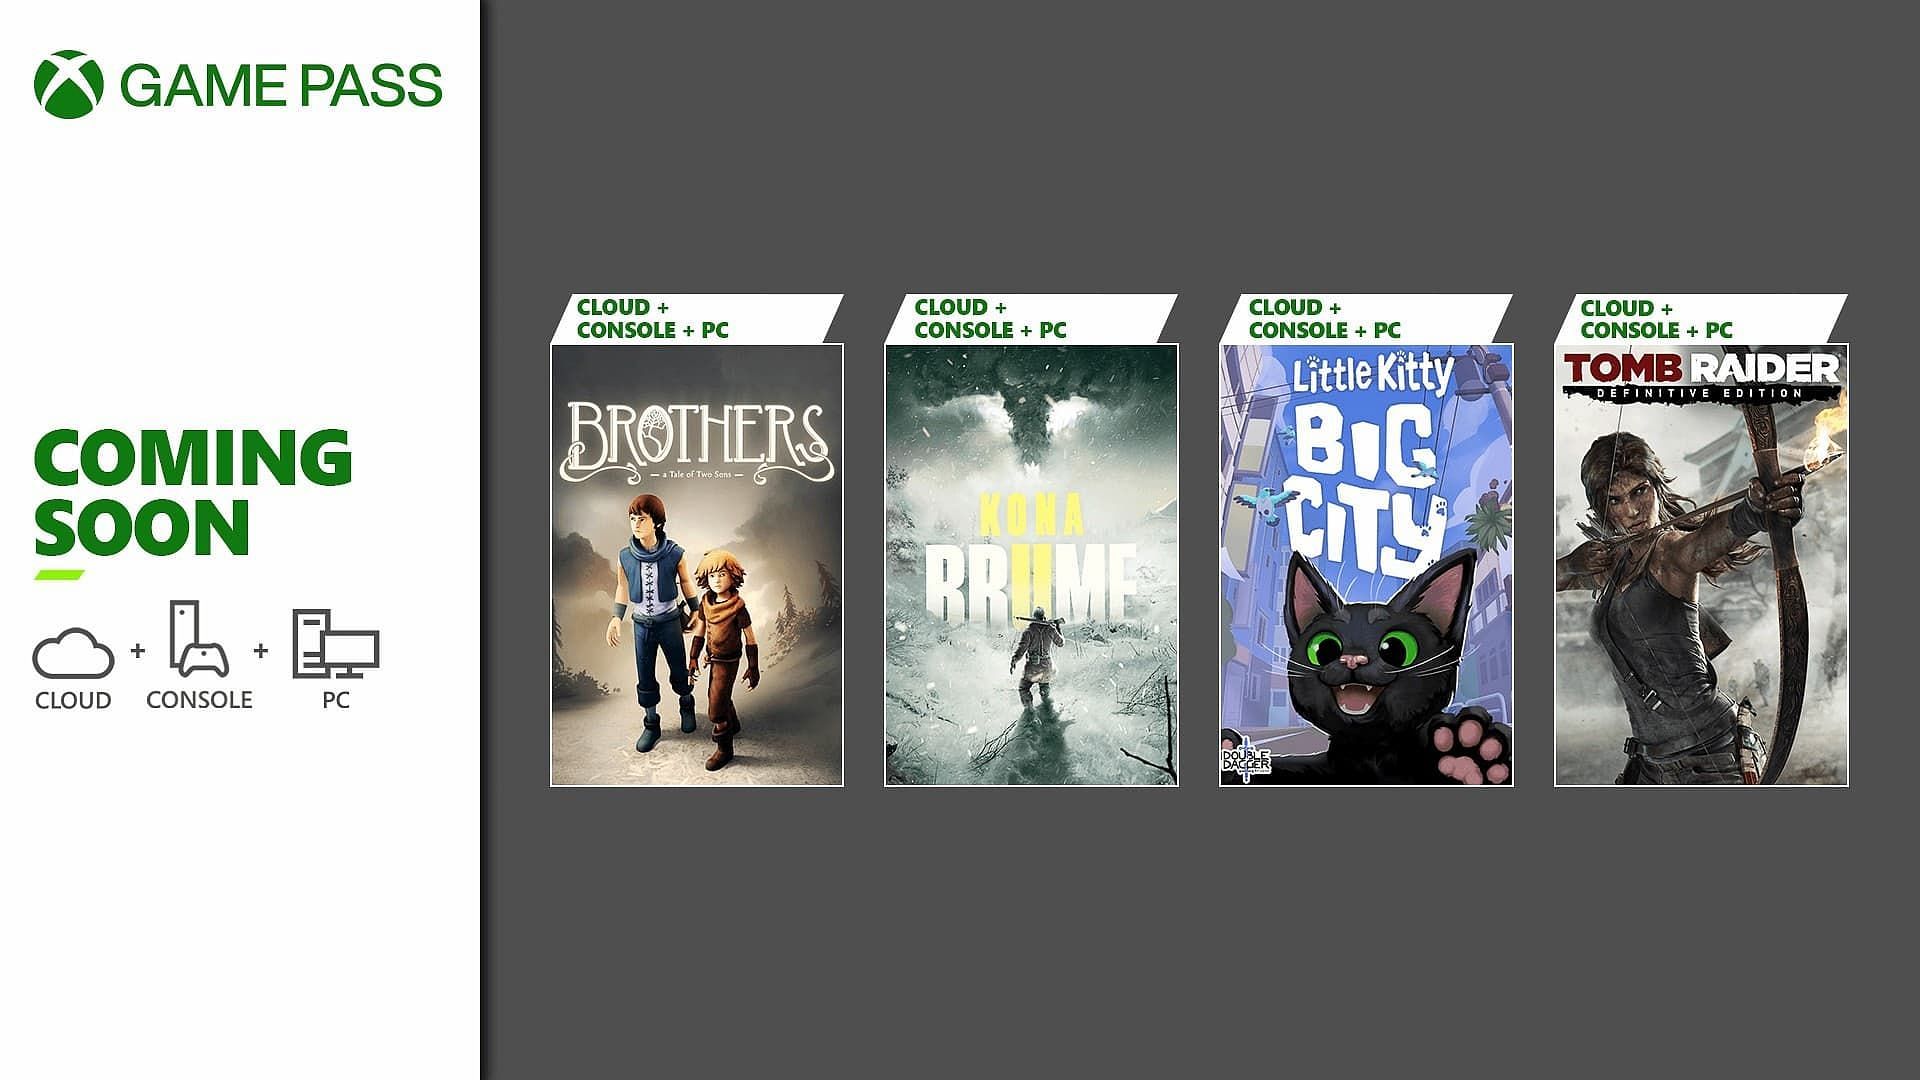 Xbox Game Pass games